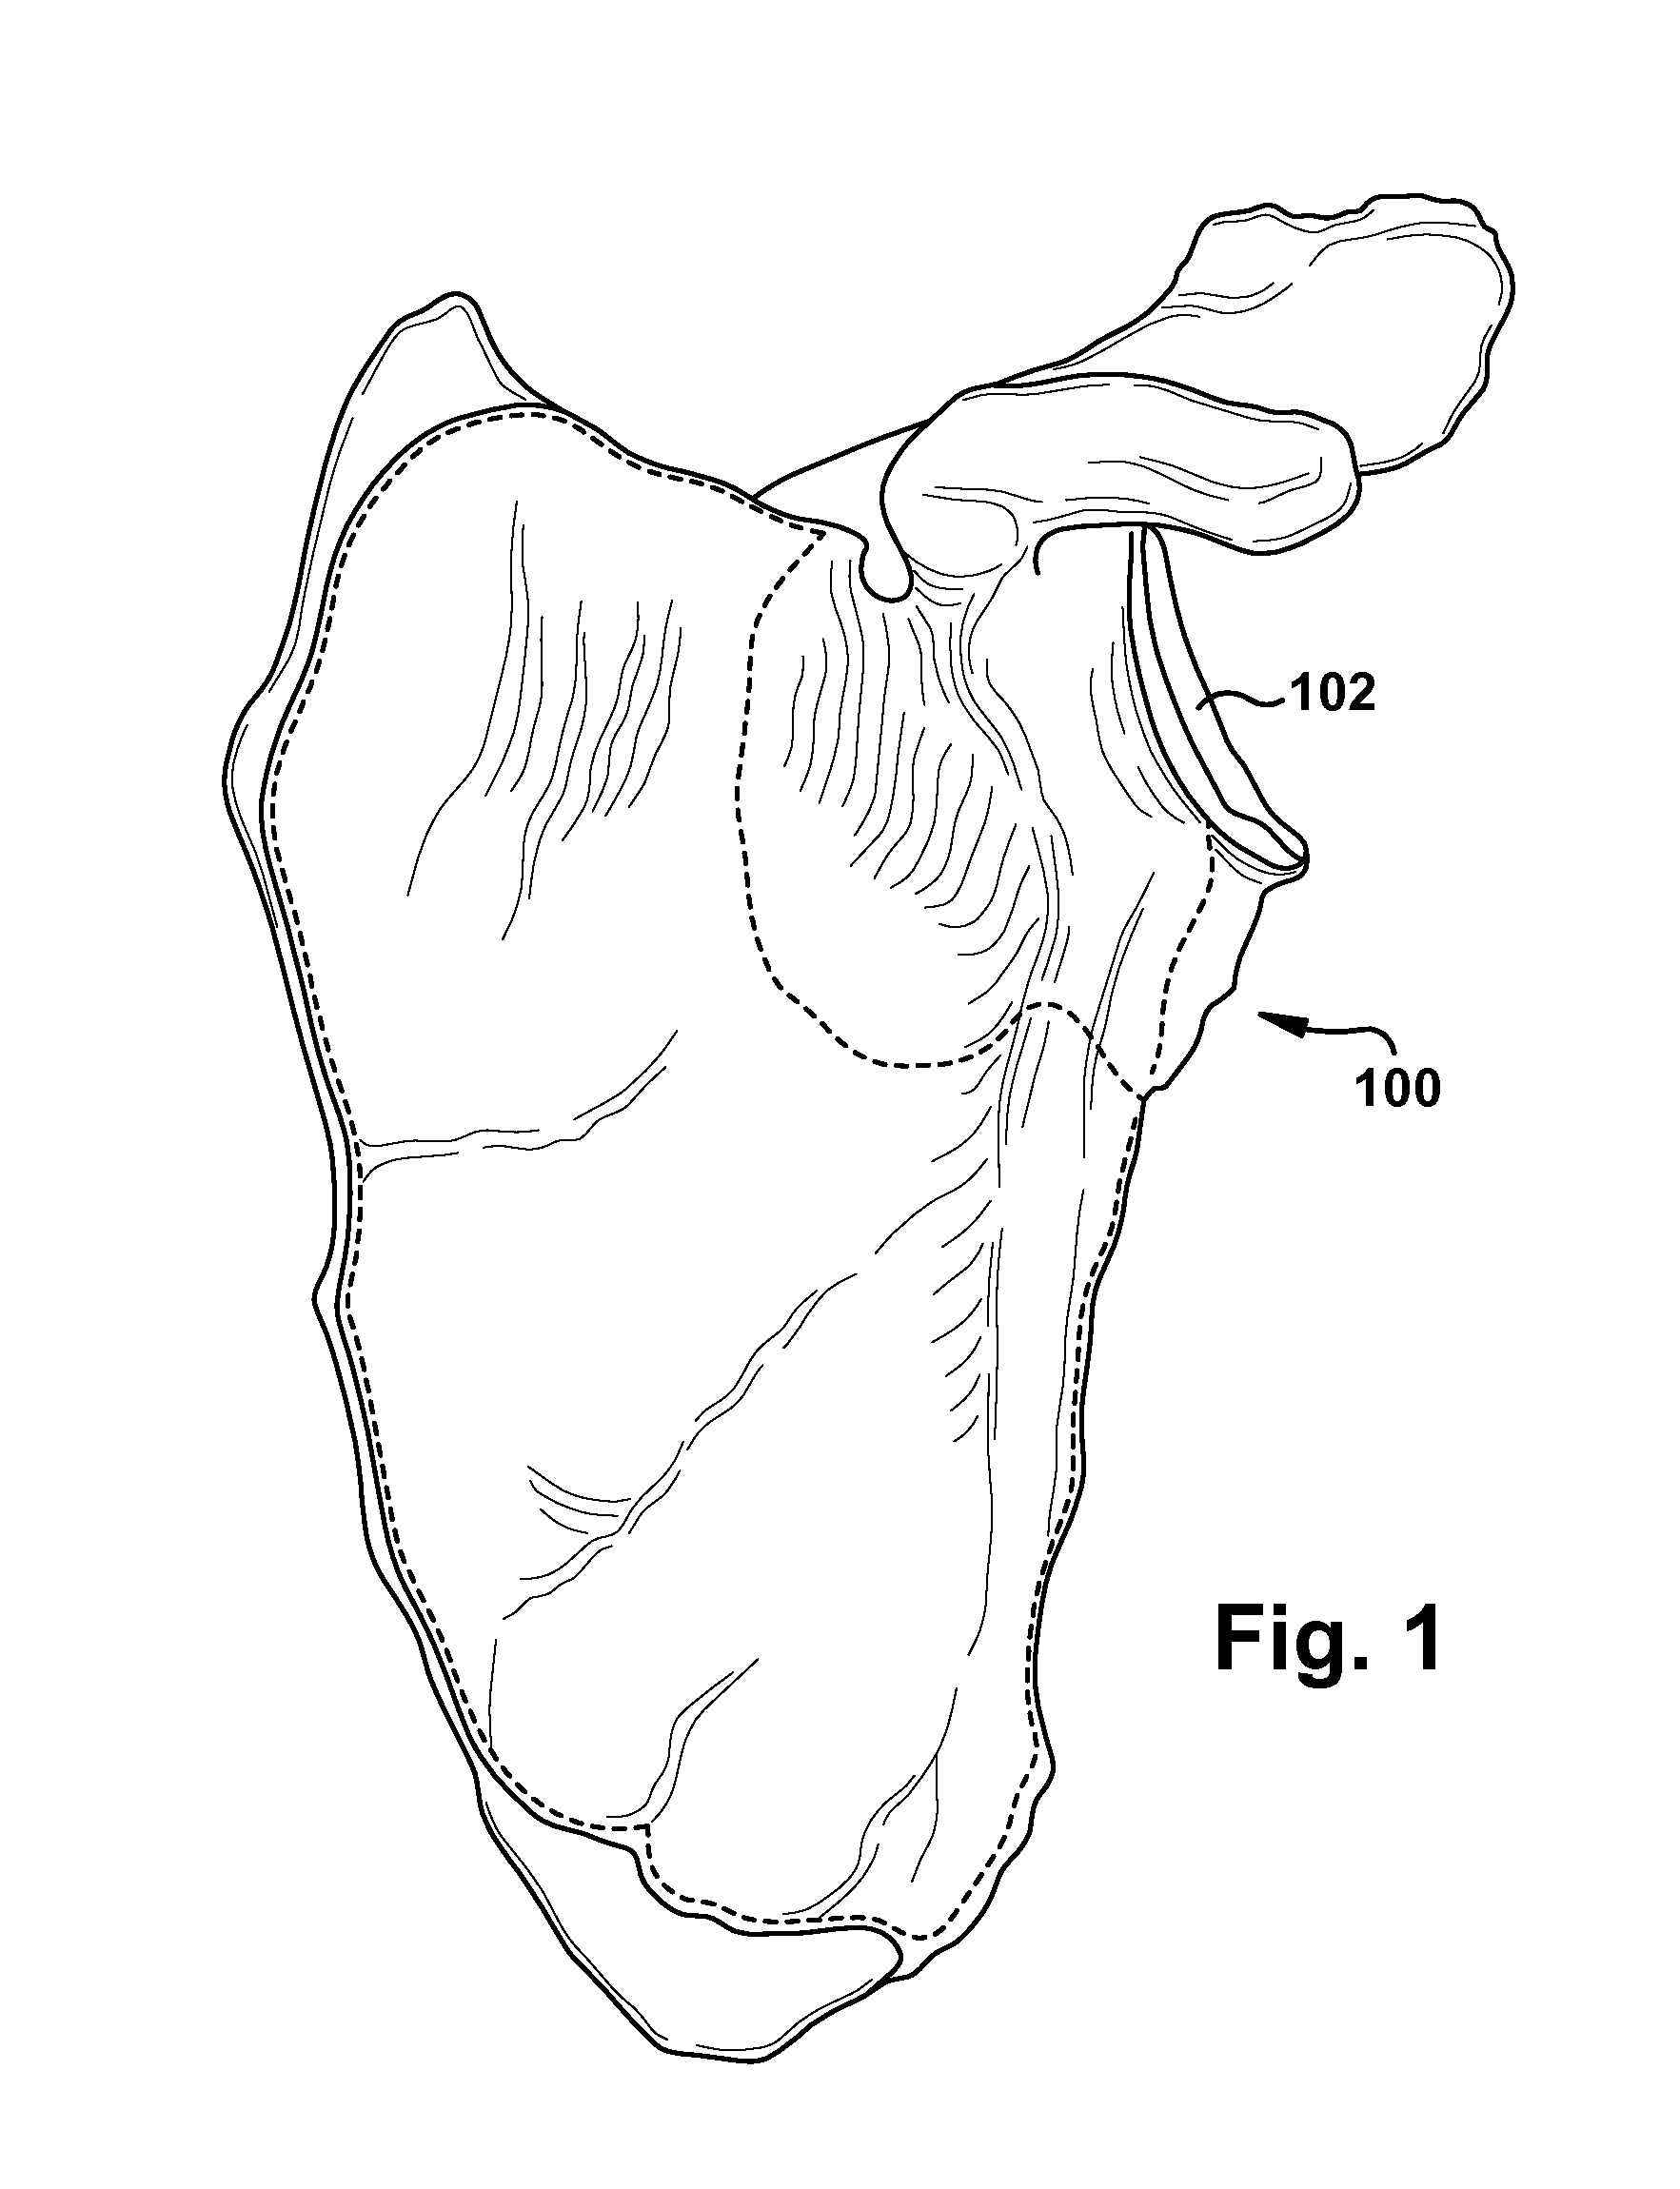 System and method for association of a guiding aid with a patient tissue